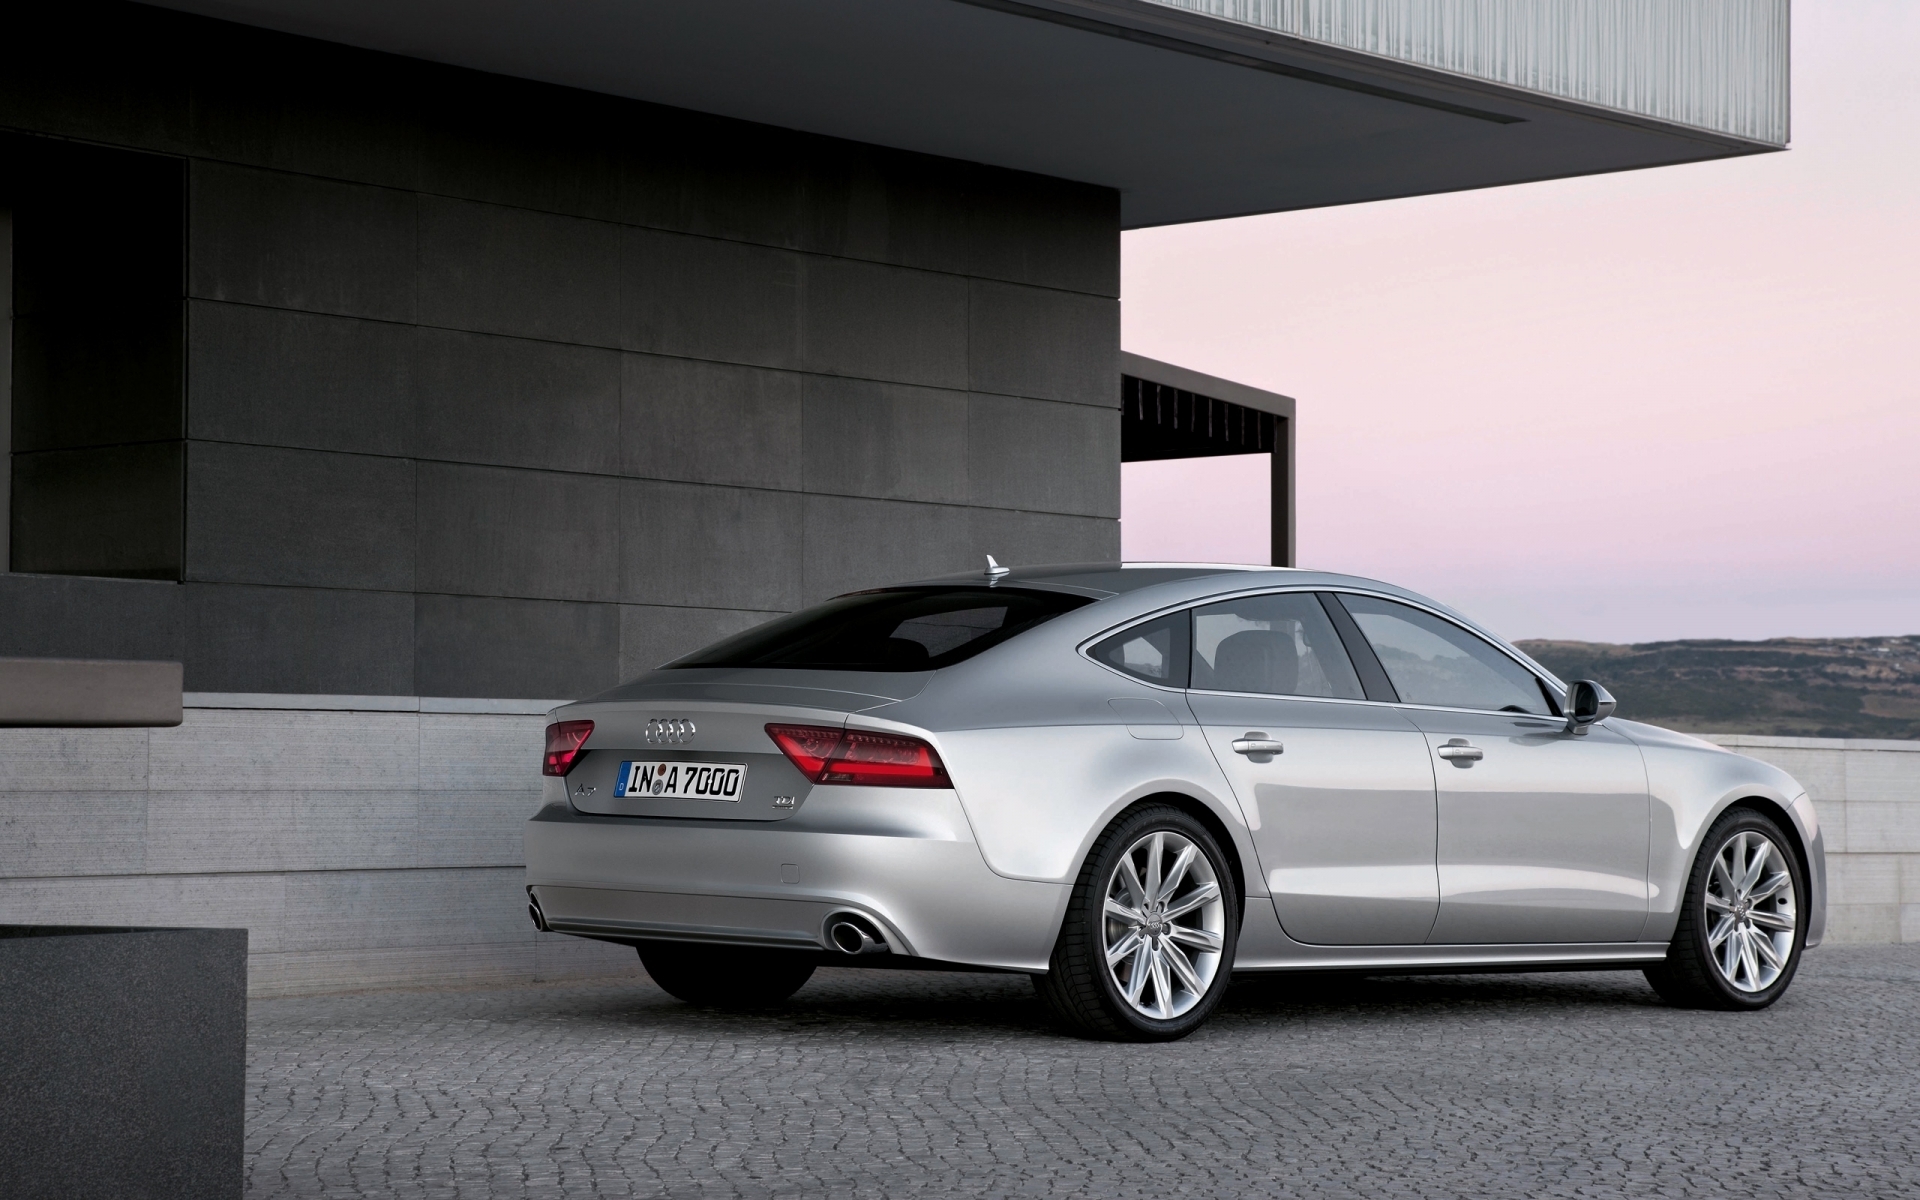 Vehicles Audi A7 HD Wallpaper | Background Image